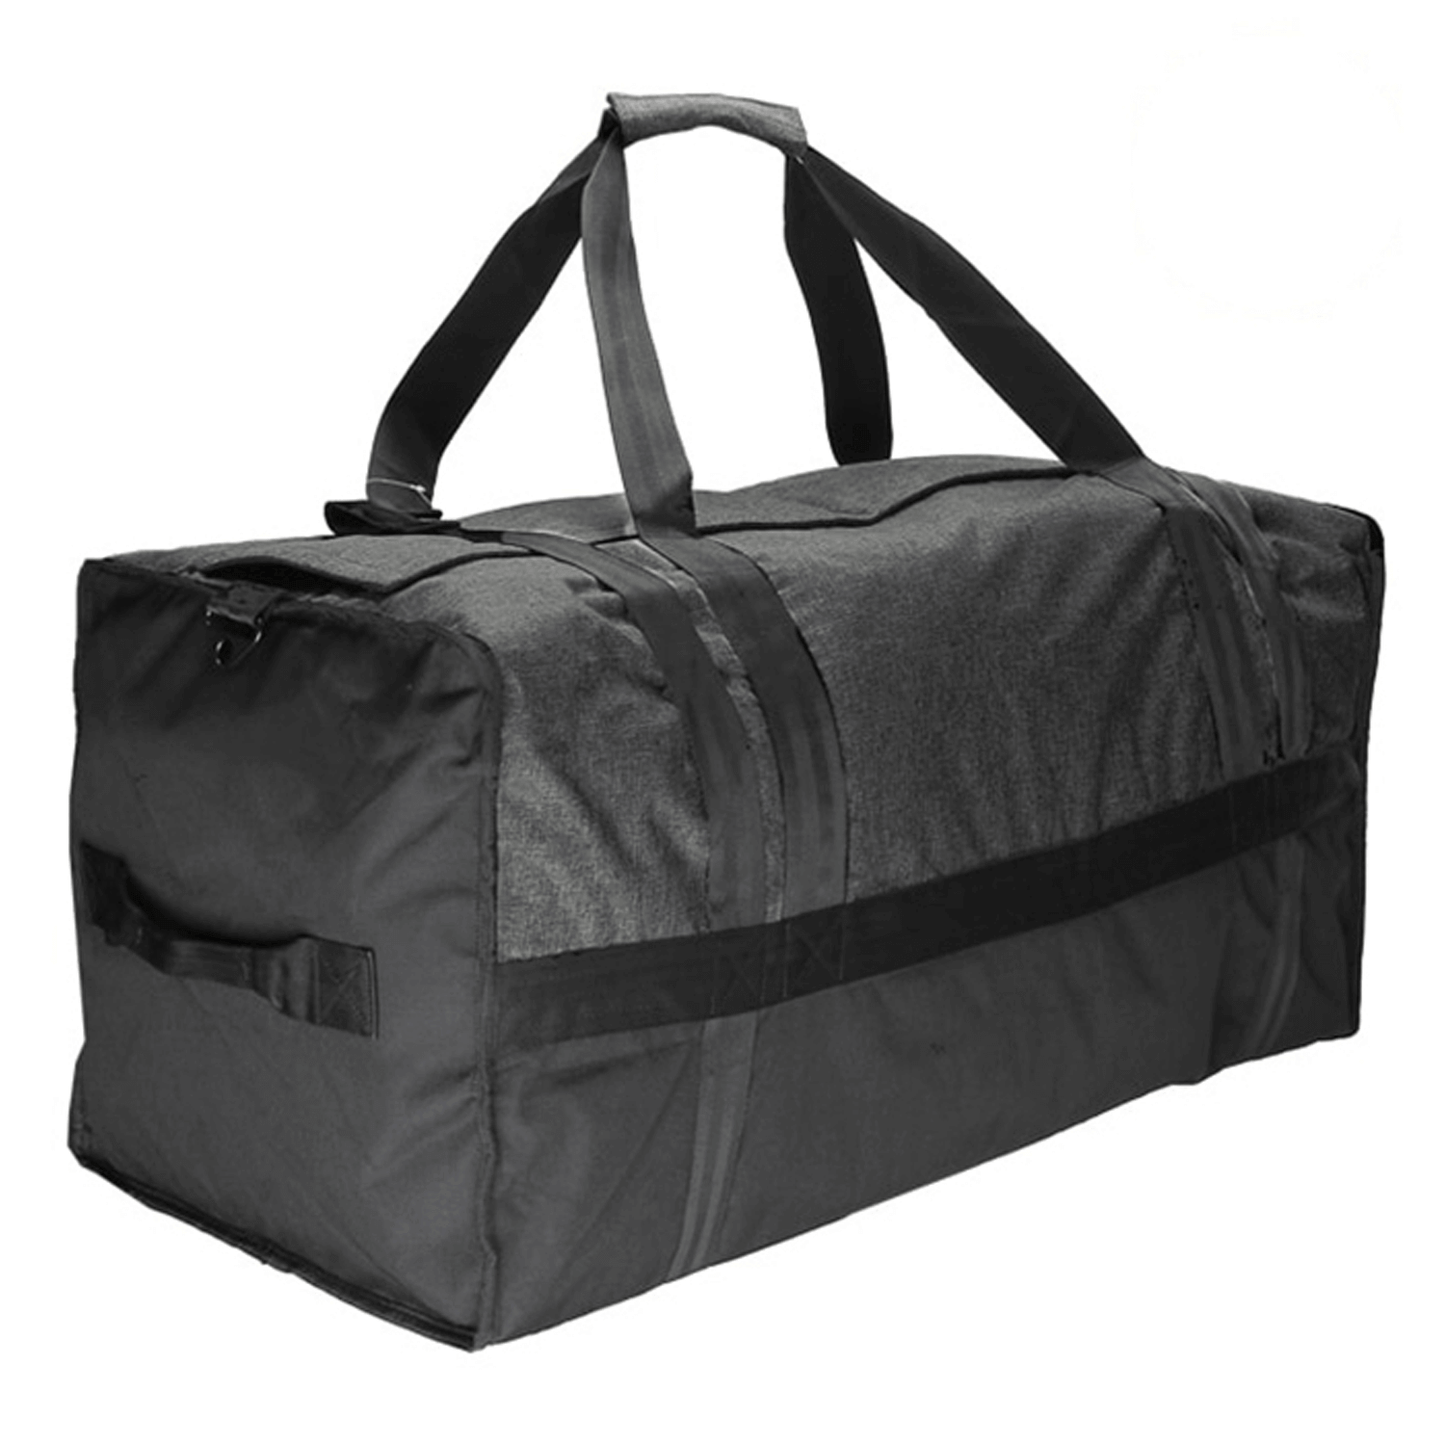 AWOL DAILY XX-Large Black Square Bag 886163 Harvest & Extraction 853336007942